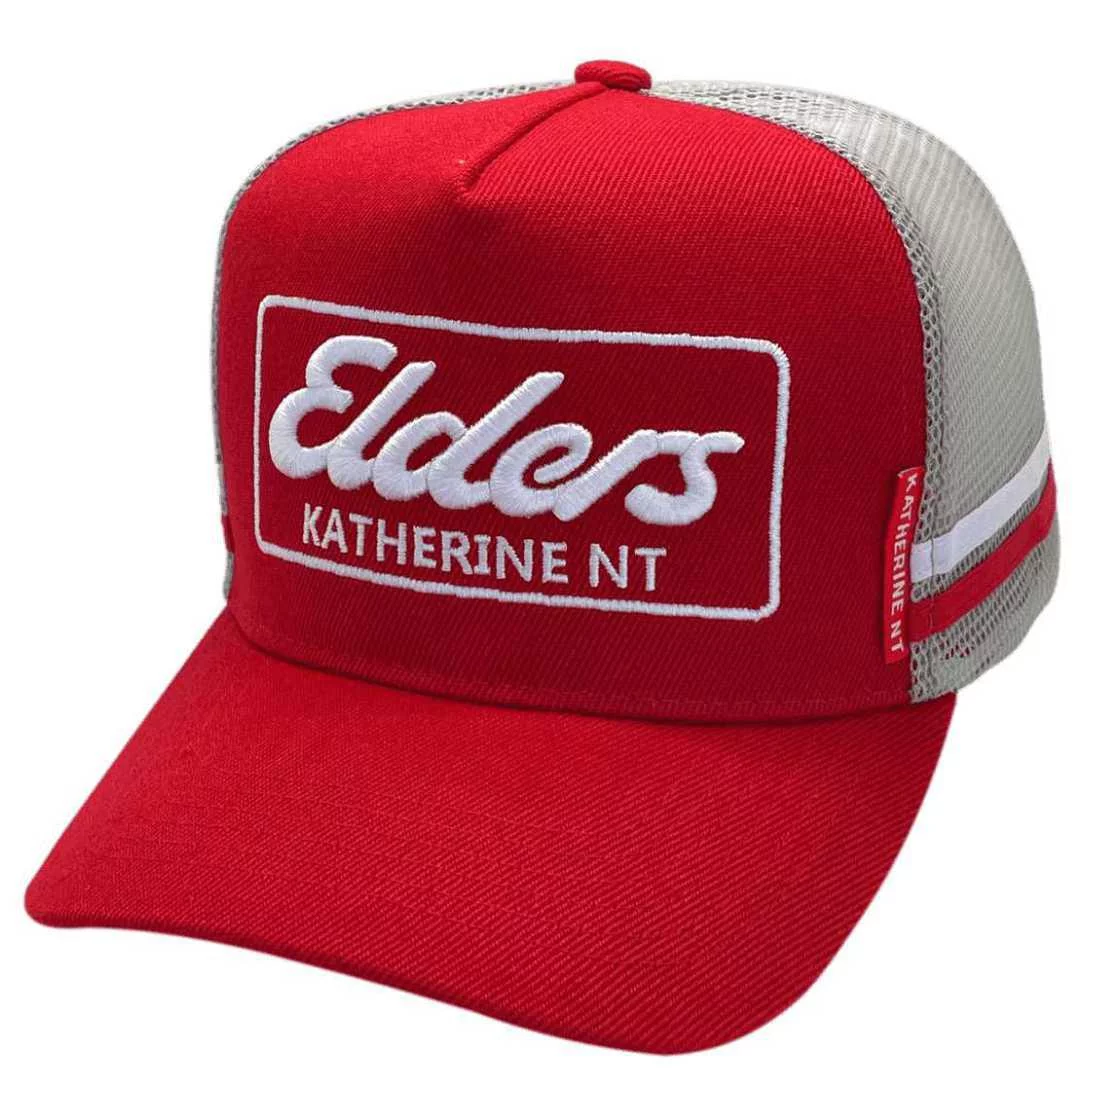 Elders Real Estate Katherine NT HP Original  Basic Aussie Trucker Hat with double side bands  Acrylic Red Grey White with 3d embroidery direct